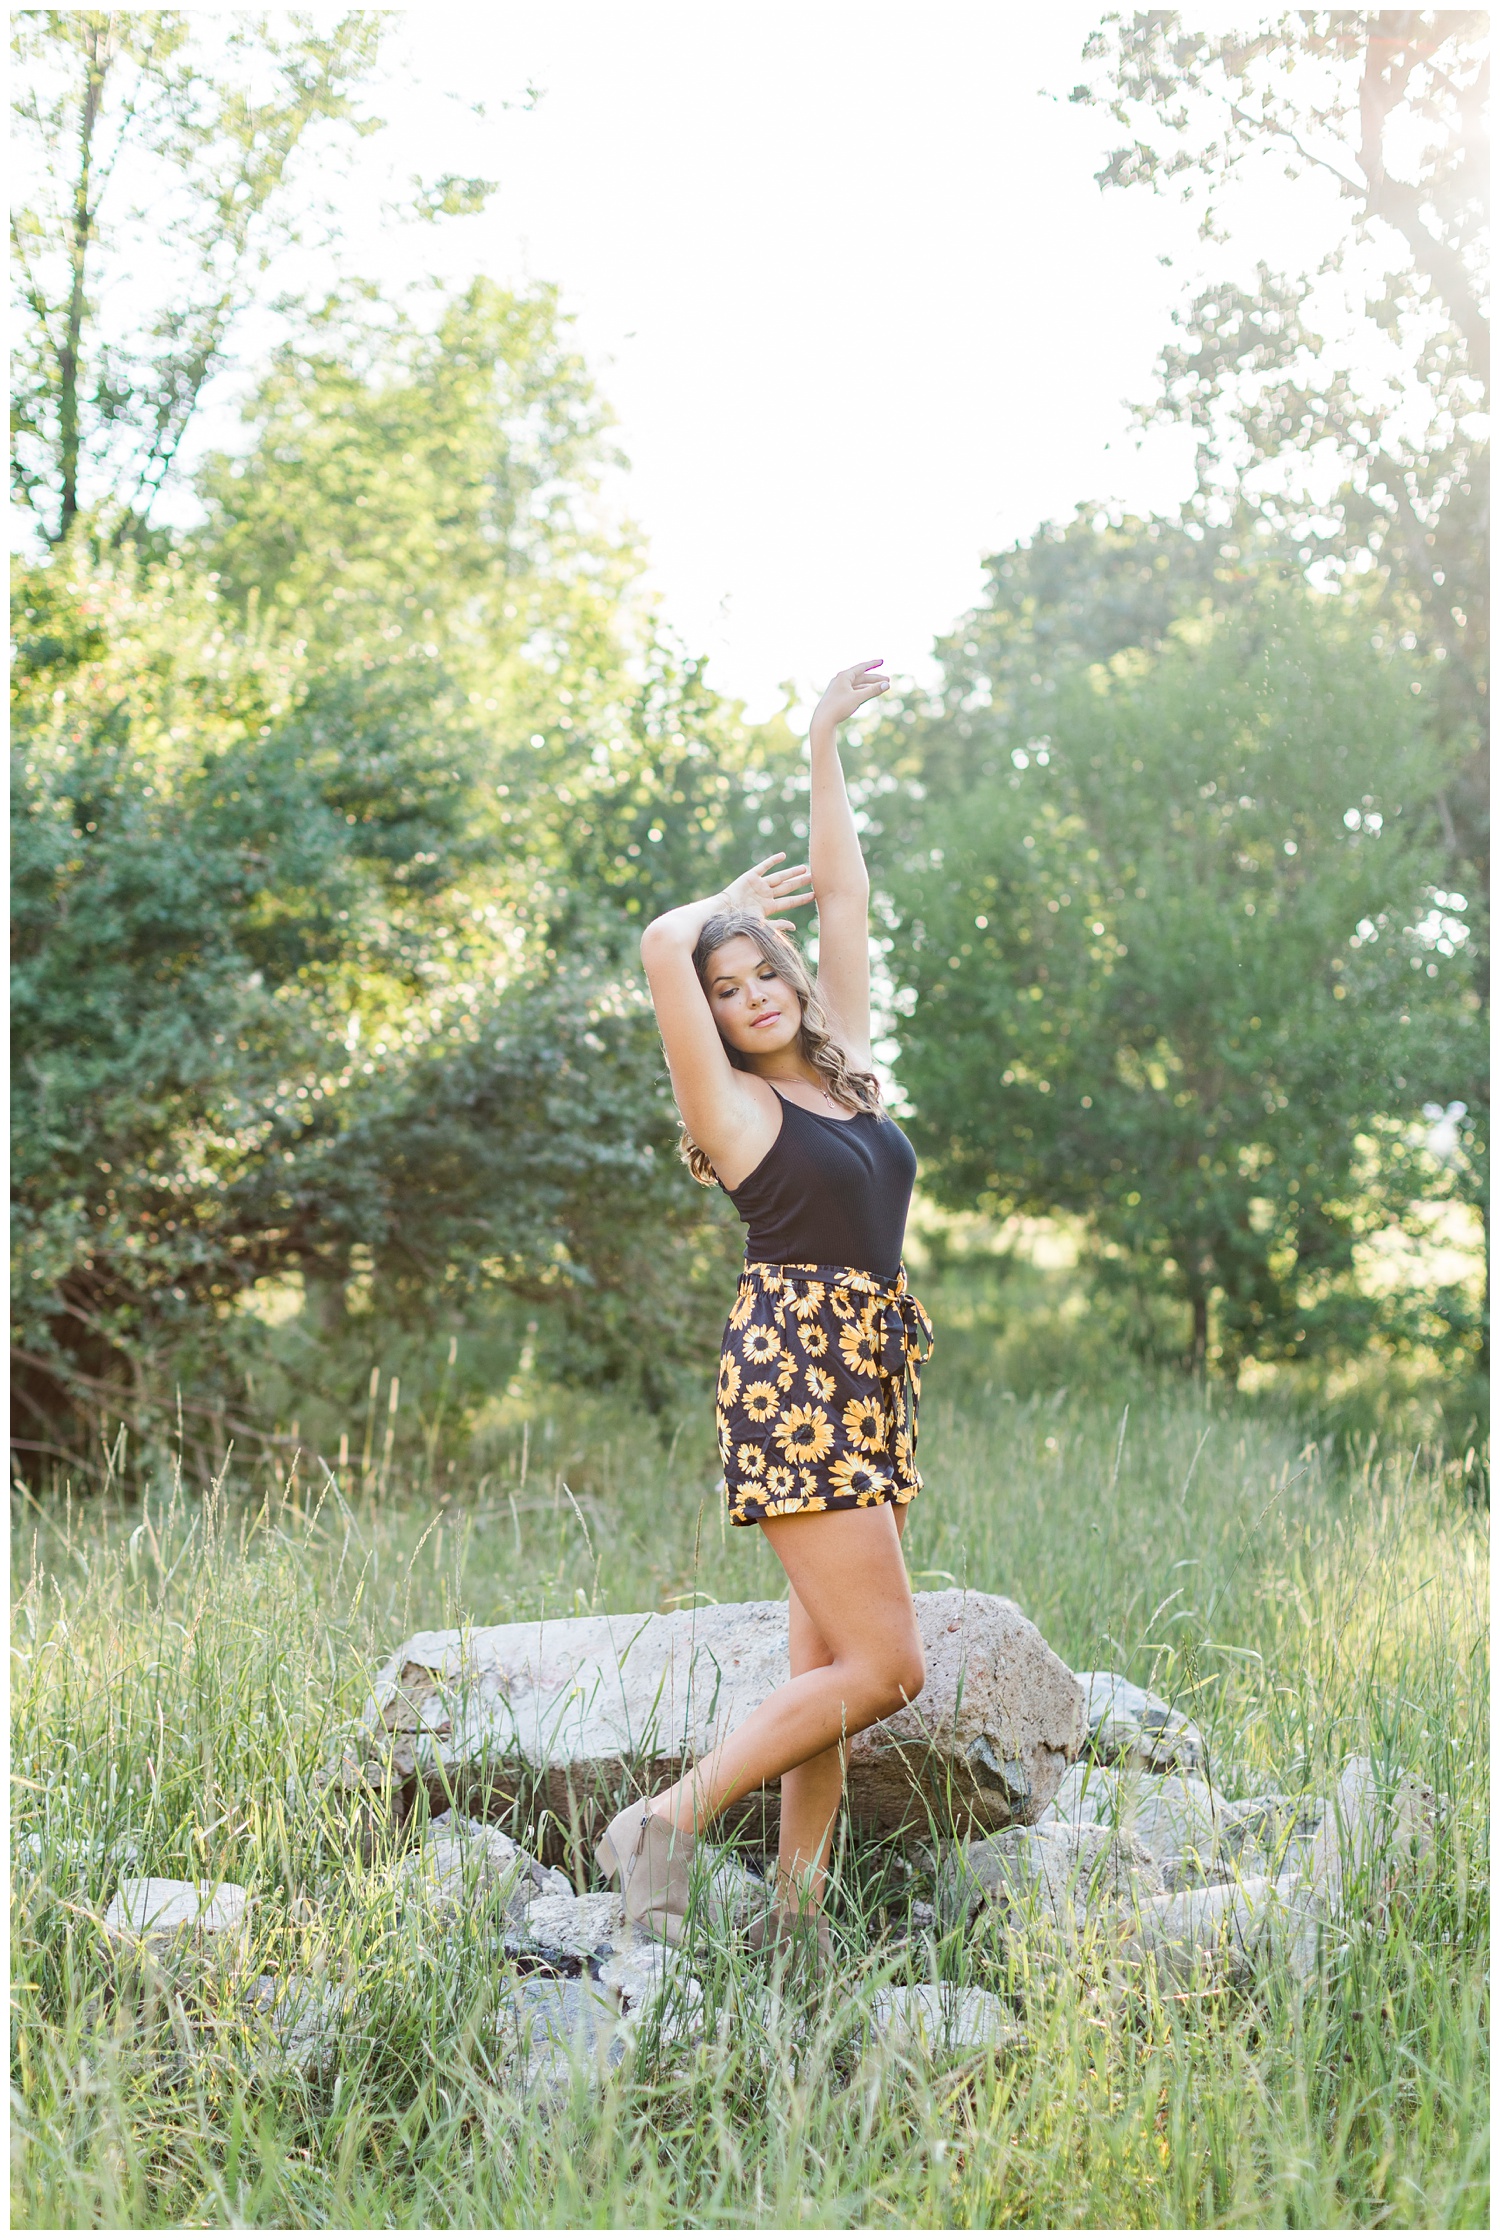 Analia poses gracefully in the middle of a grassy pasture in Iowa | CB Studio